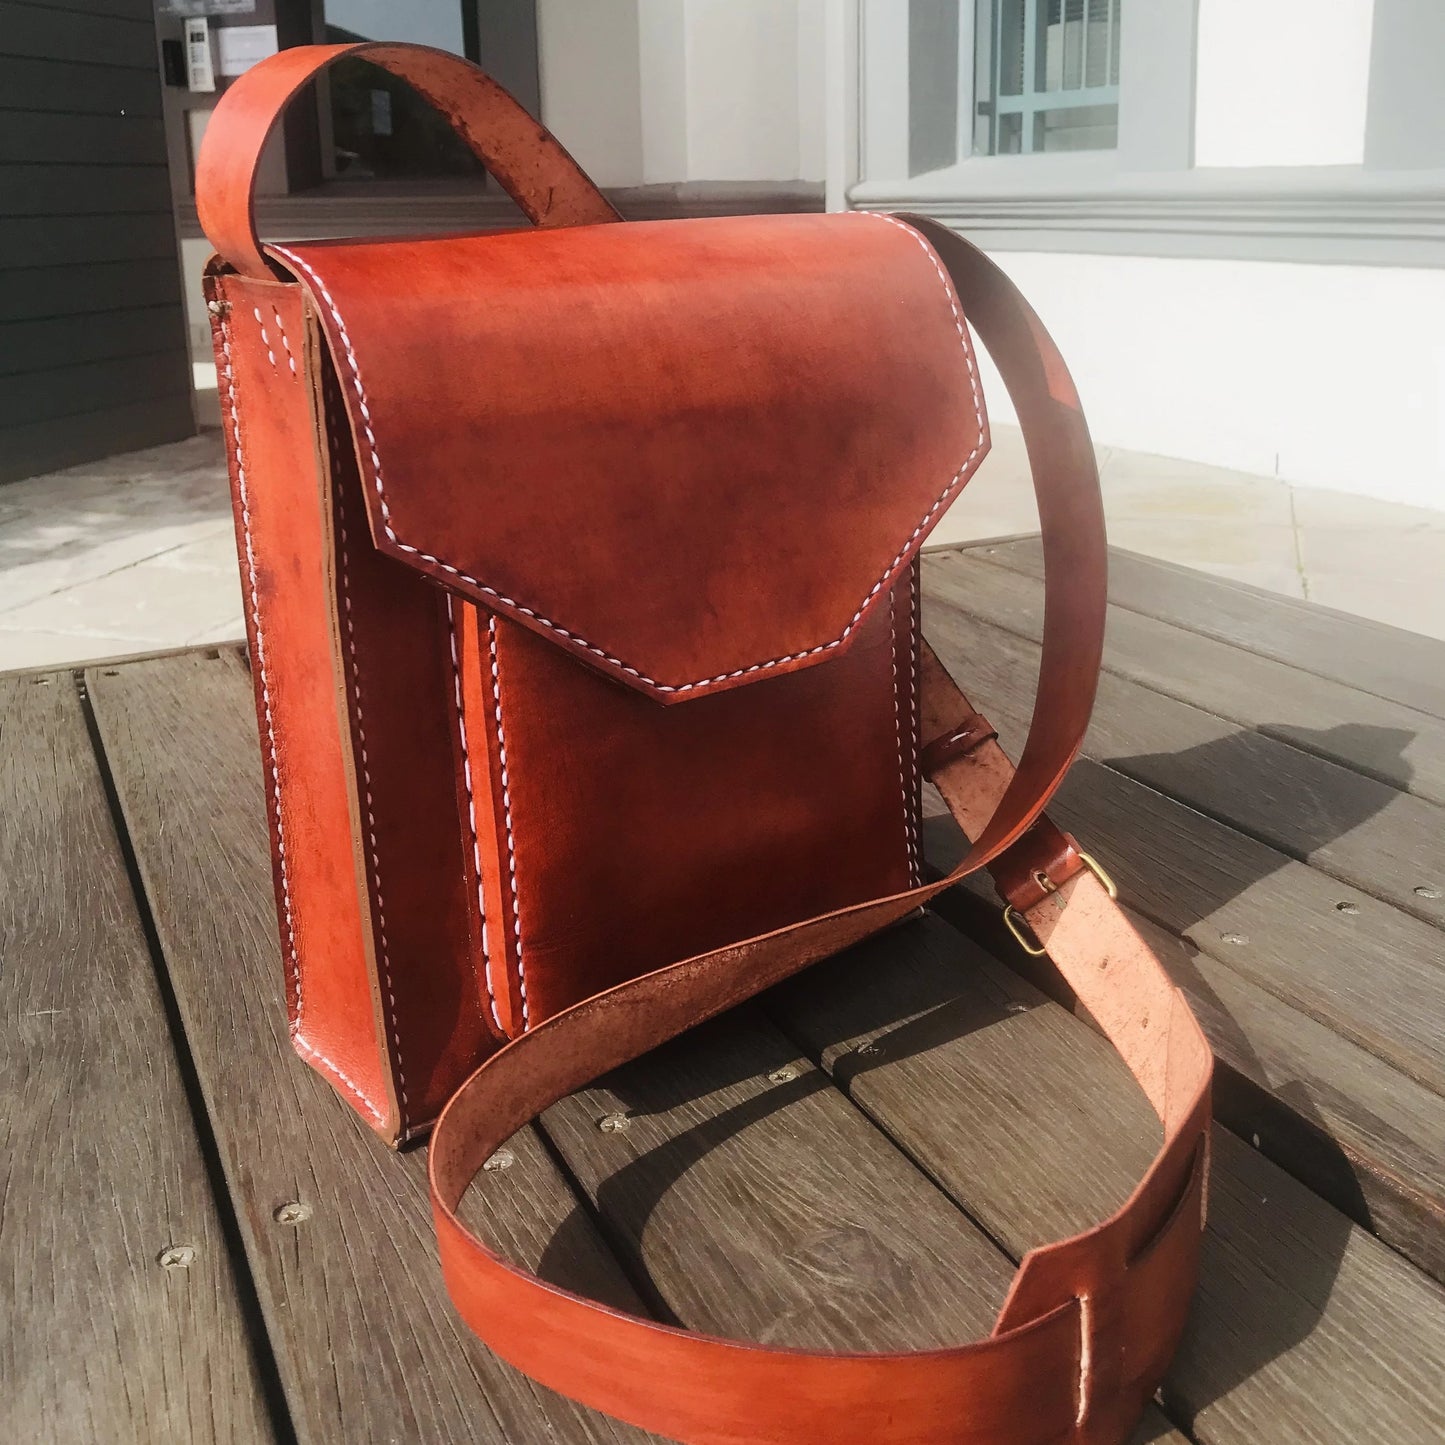 oak hand-stitched genuine leather man bag on a table